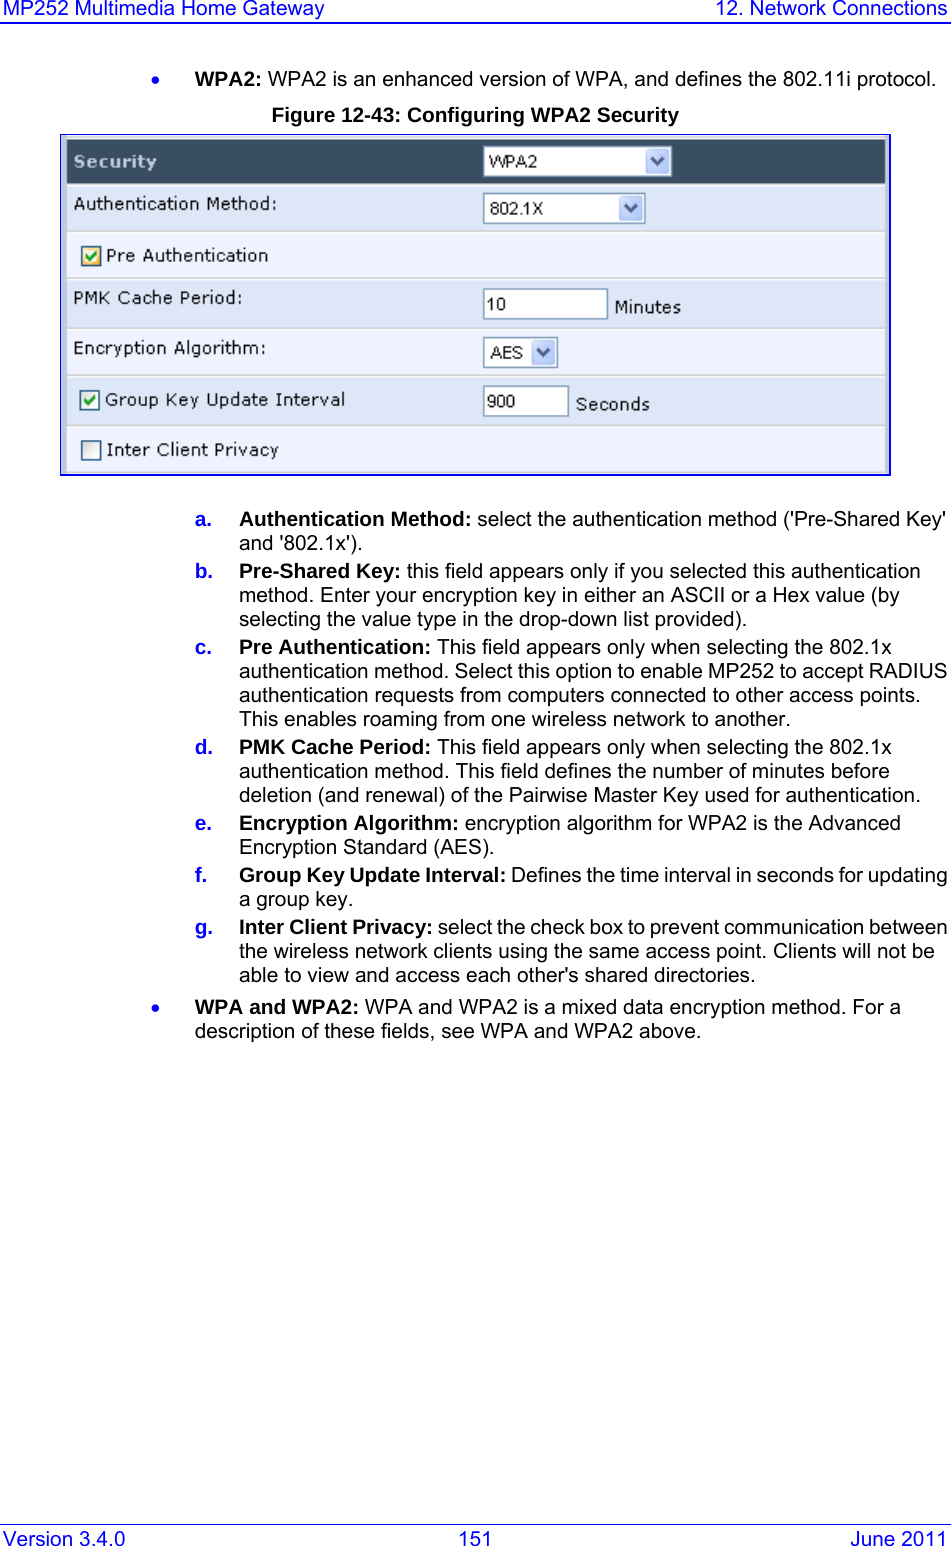 MP252 Multimedia Home Gateway  12. Network Connections Version 3.4.0  151  June 2011 • WPA2: WPA2 is an enhanced version of WPA, and defines the 802.11i protocol. Figure 12-43: Configuring WPA2 Security  a.  Authentication Method: select the authentication method (&apos;Pre-Shared Key&apos; and &apos;802.1x&apos;). b.  Pre-Shared Key: this field appears only if you selected this authentication method. Enter your encryption key in either an ASCII or a Hex value (by selecting the value type in the drop-down list provided). c.  Pre Authentication: This field appears only when selecting the 802.1x authentication method. Select this option to enable MP252 to accept RADIUS authentication requests from computers connected to other access points. This enables roaming from one wireless network to another. d.  PMK Cache Period: This field appears only when selecting the 802.1x authentication method. This field defines the number of minutes before deletion (and renewal) of the Pairwise Master Key used for authentication. e.  Encryption Algorithm: encryption algorithm for WPA2 is the Advanced Encryption Standard (AES). f.  Group Key Update Interval: Defines the time interval in seconds for updating a group key. g.  Inter Client Privacy: select the check box to prevent communication between the wireless network clients using the same access point. Clients will not be able to view and access each other&apos;s shared directories. • WPA and WPA2: WPA and WPA2 is a mixed data encryption method. For a description of these fields, see WPA and WPA2 above. 